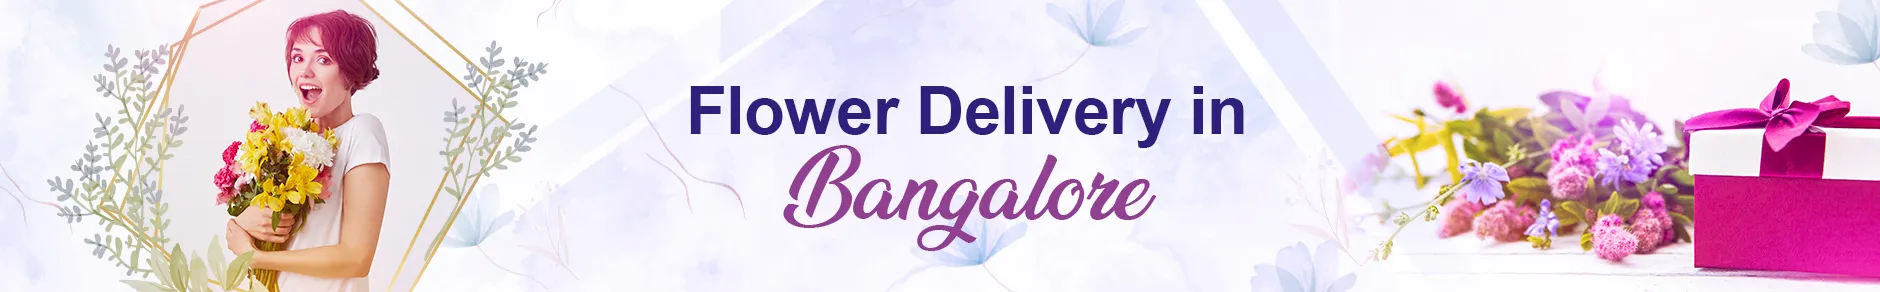 Flower Delivery in Bangalore | Send Flowers to Bangalore in 2 hours | Free Delivery